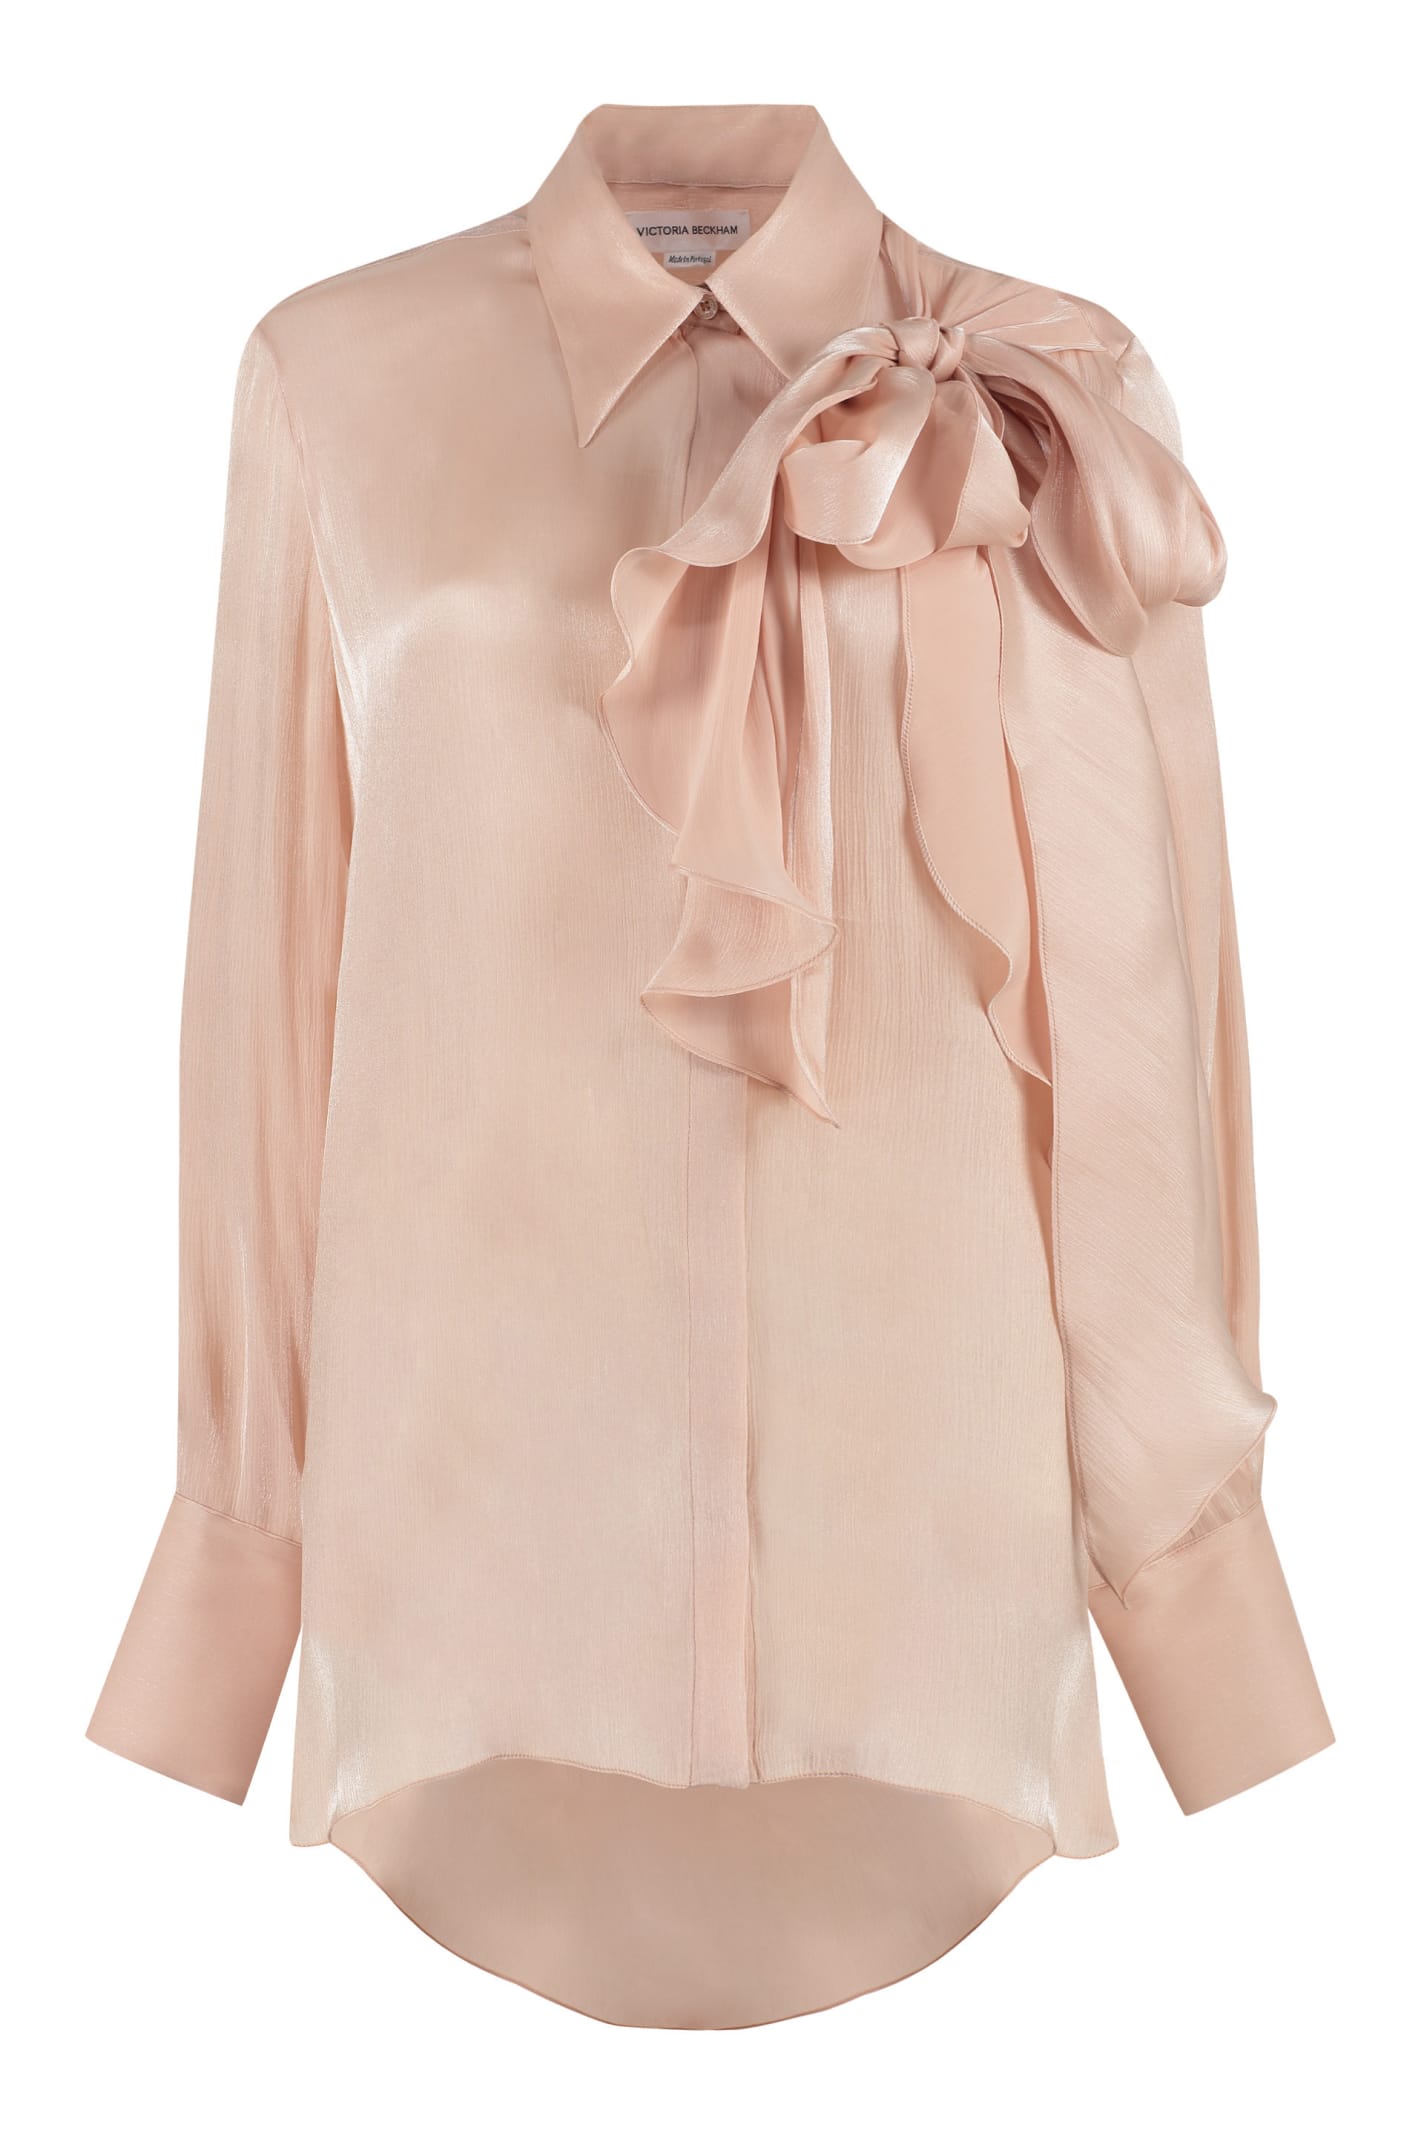 VICTORIA BECKHAM CREPE BLOUSE WITH BOW